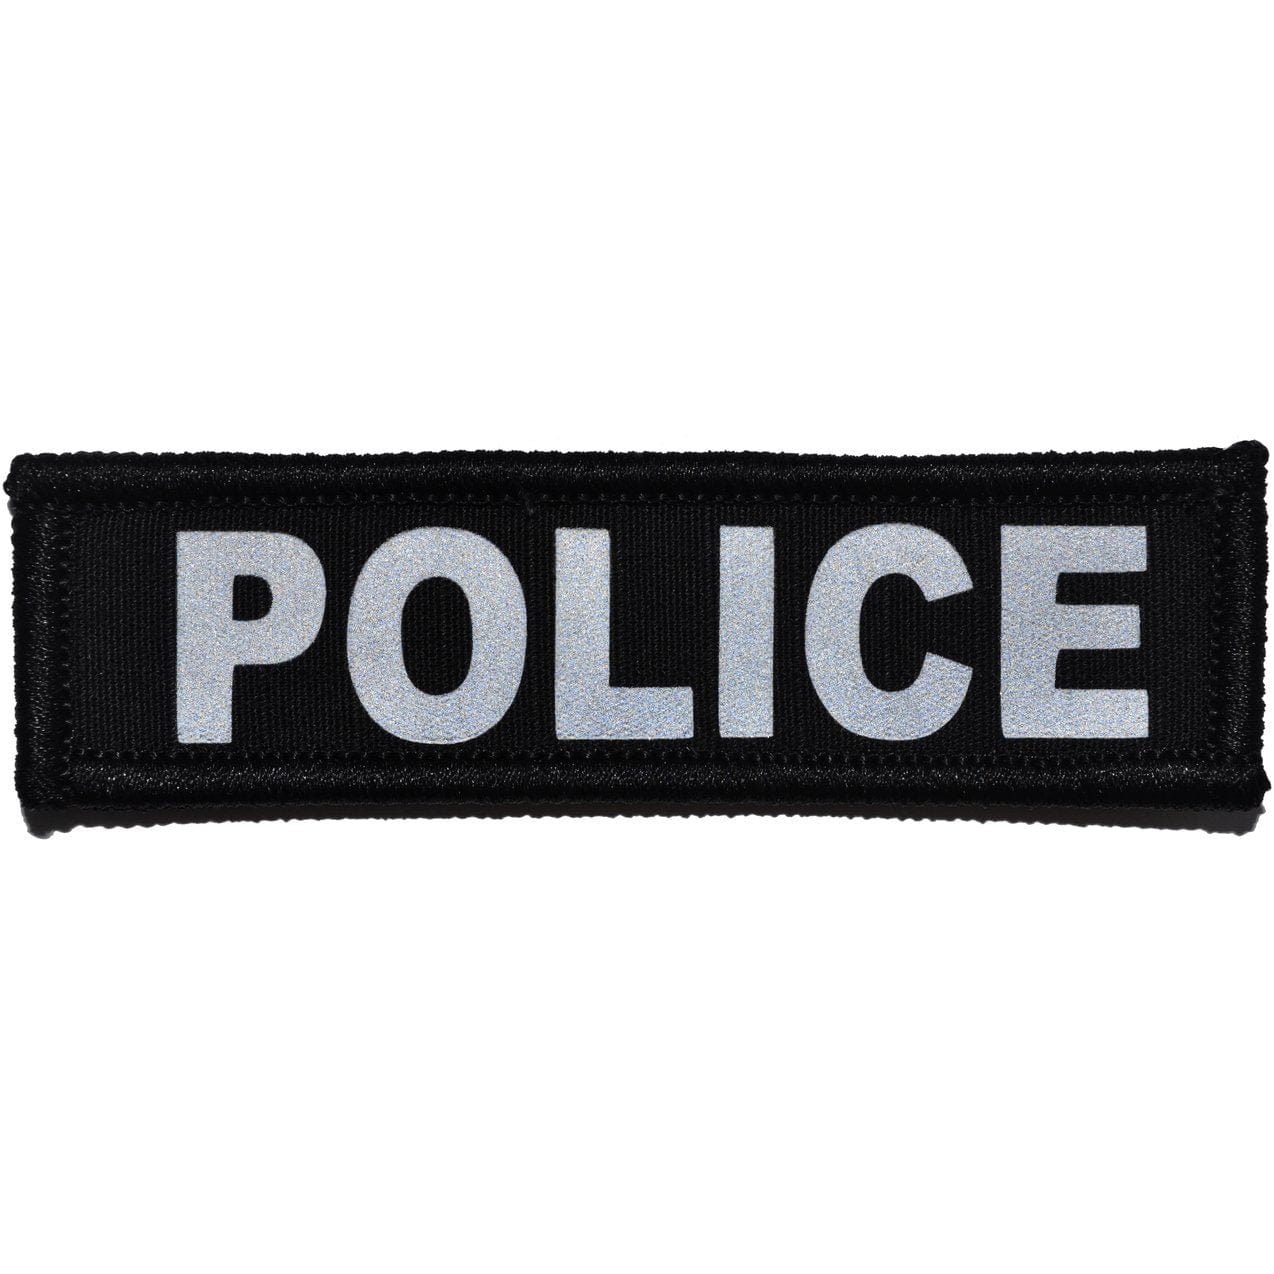 Tactical Gear Junkie Patches Black Police Reflective - 1x3.75 Patch